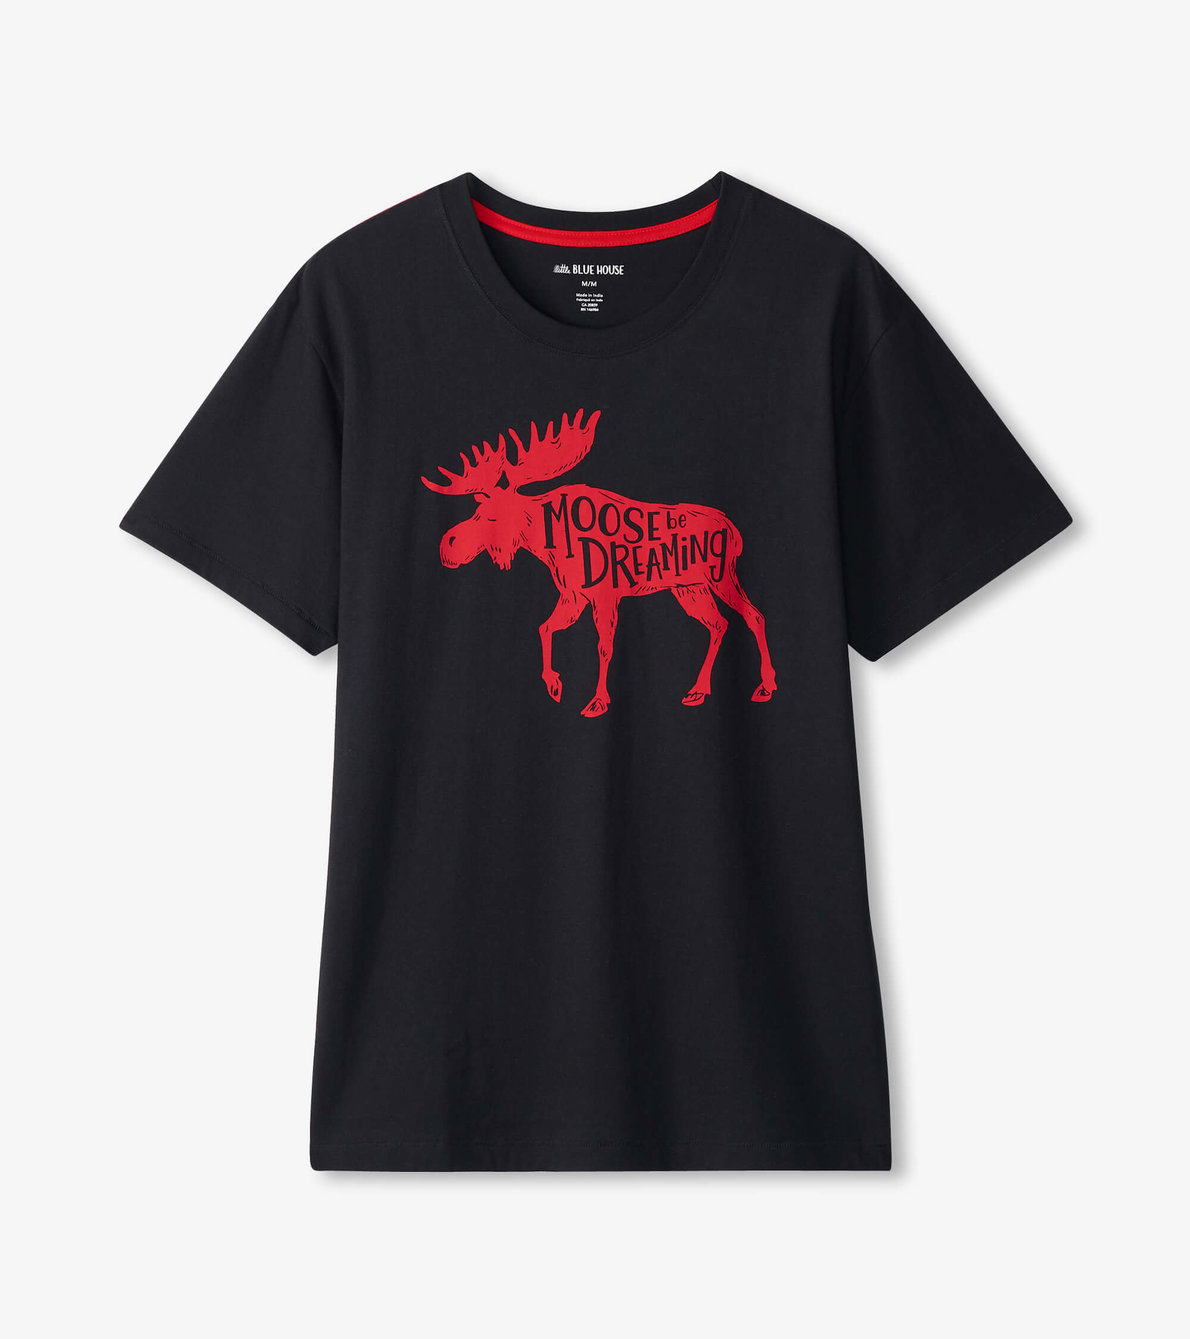 View larger image of Moose Be Dreaming Men's Tee